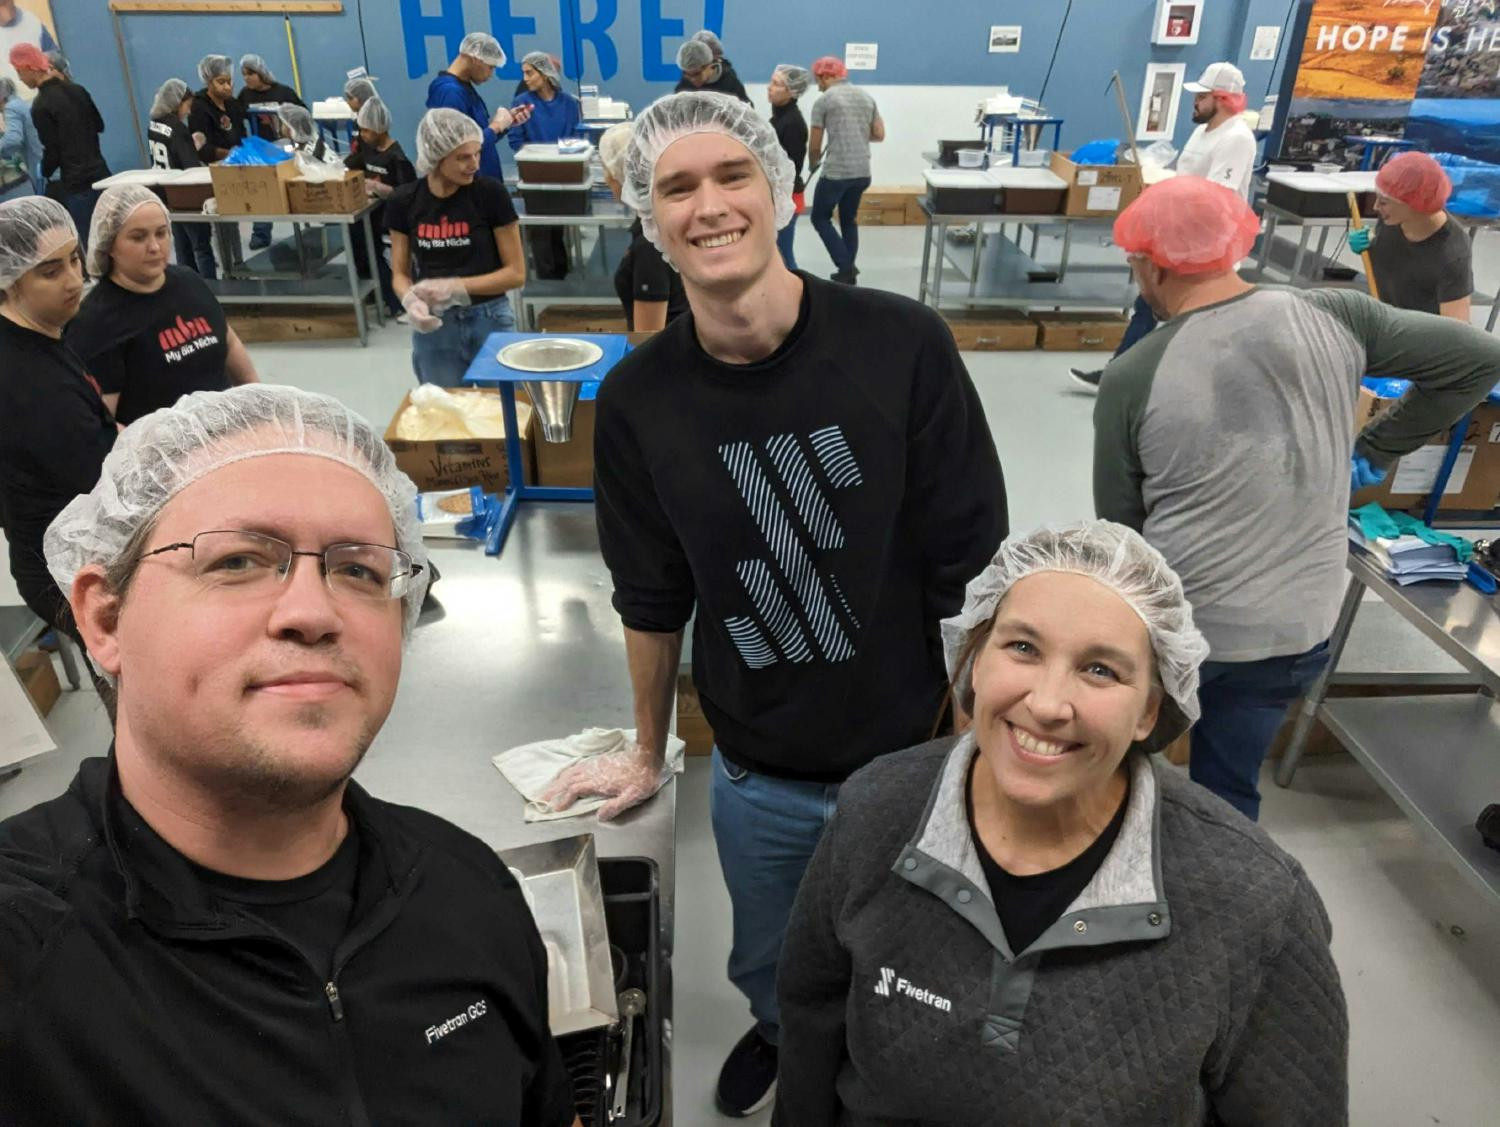 The Remote Employee Volunteer Event in Arizona for Feed My Starving Children (FMSC) 